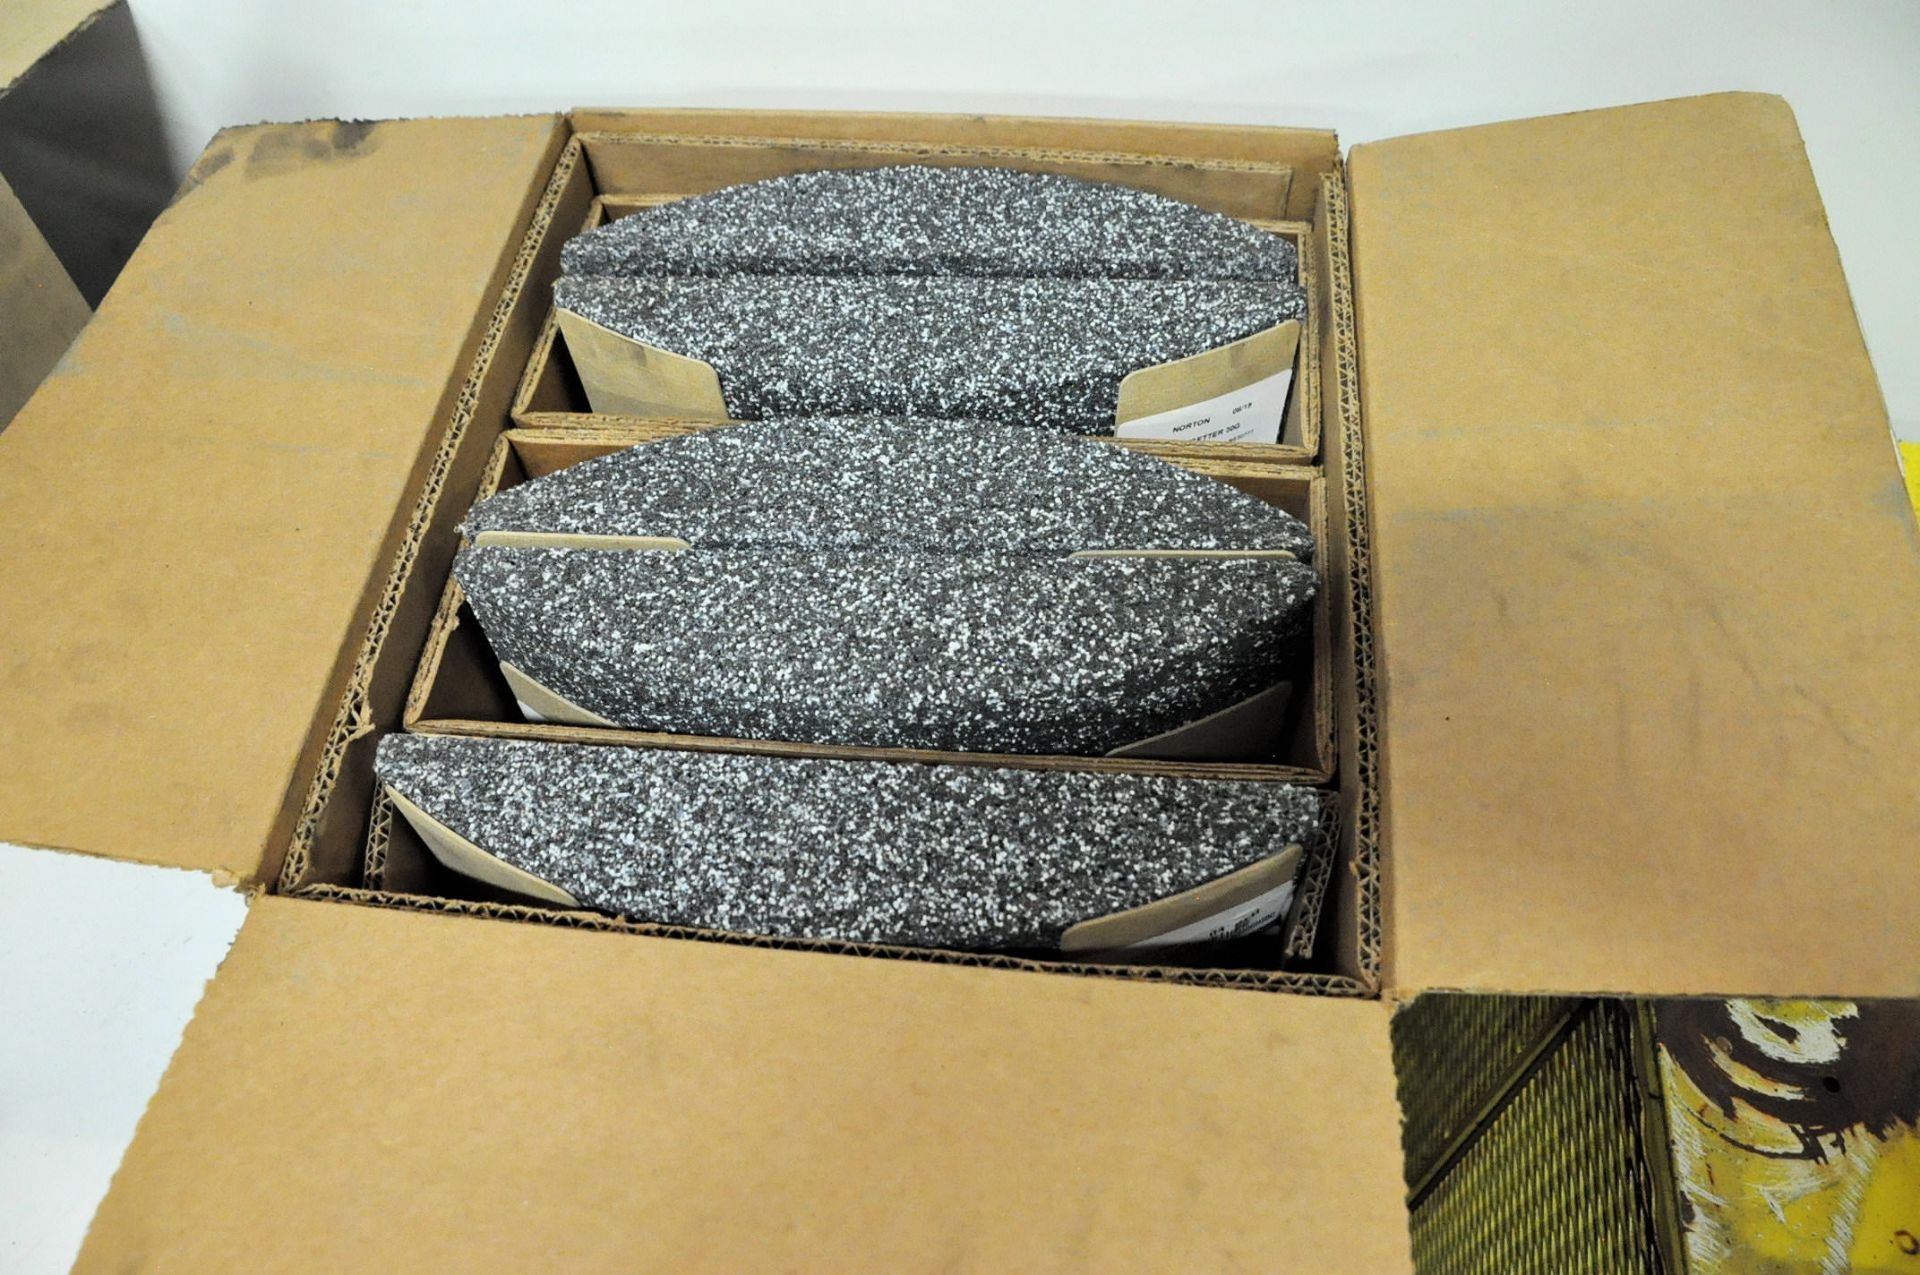 Lot-Grinding Shoes in (9) Boxes, (Bldg 2) - Image 5 of 7